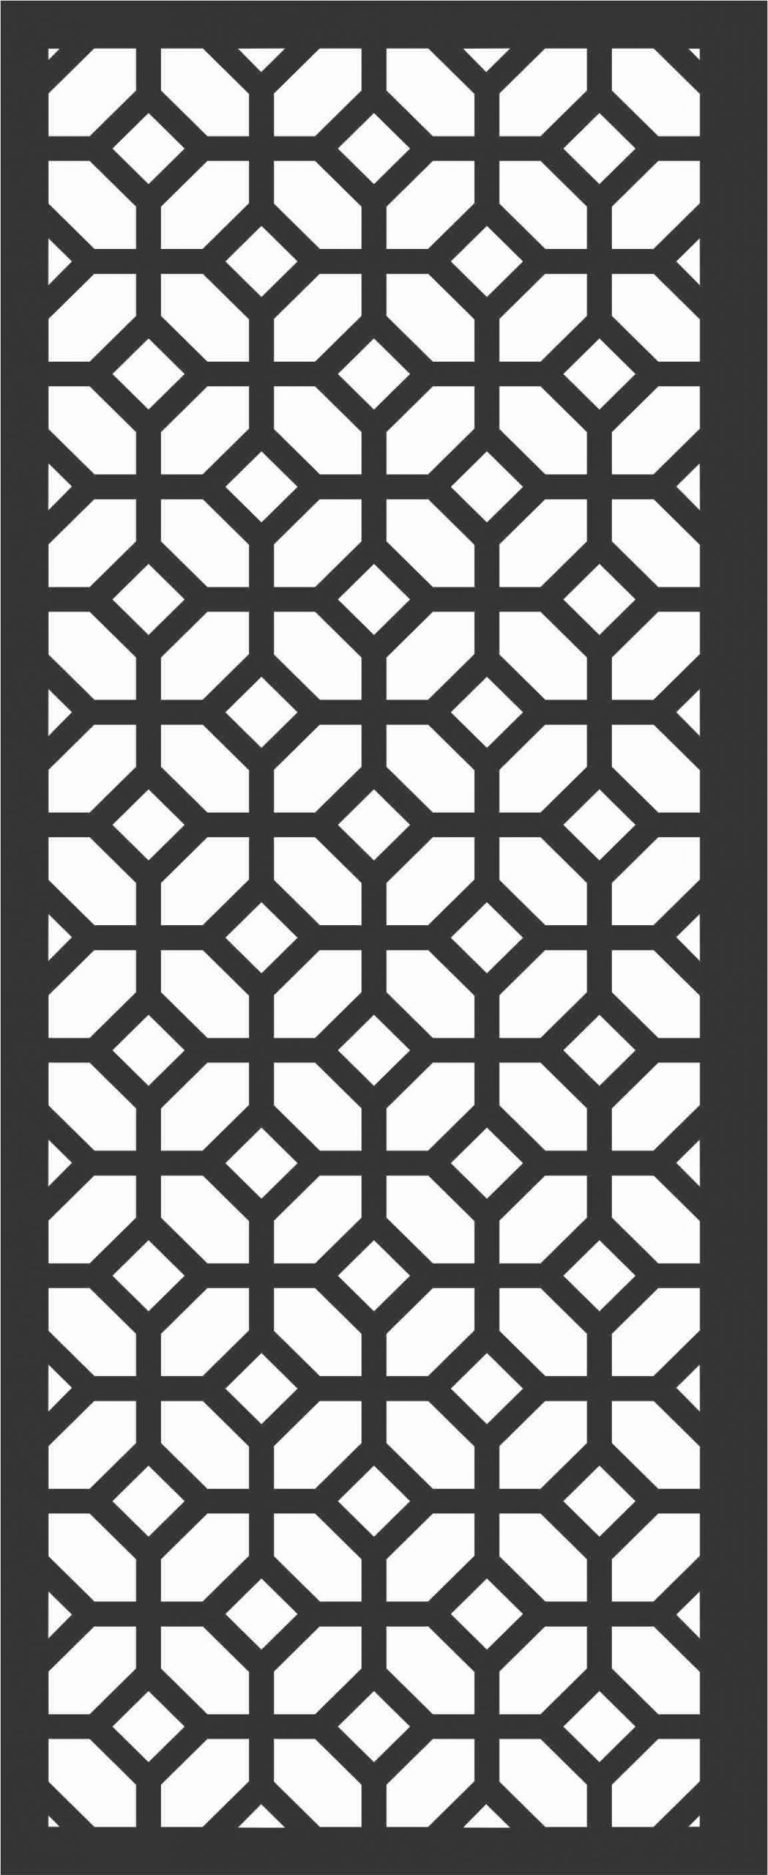 Decorative Screen Patterns For Laser Cutting 175 Free DXF File